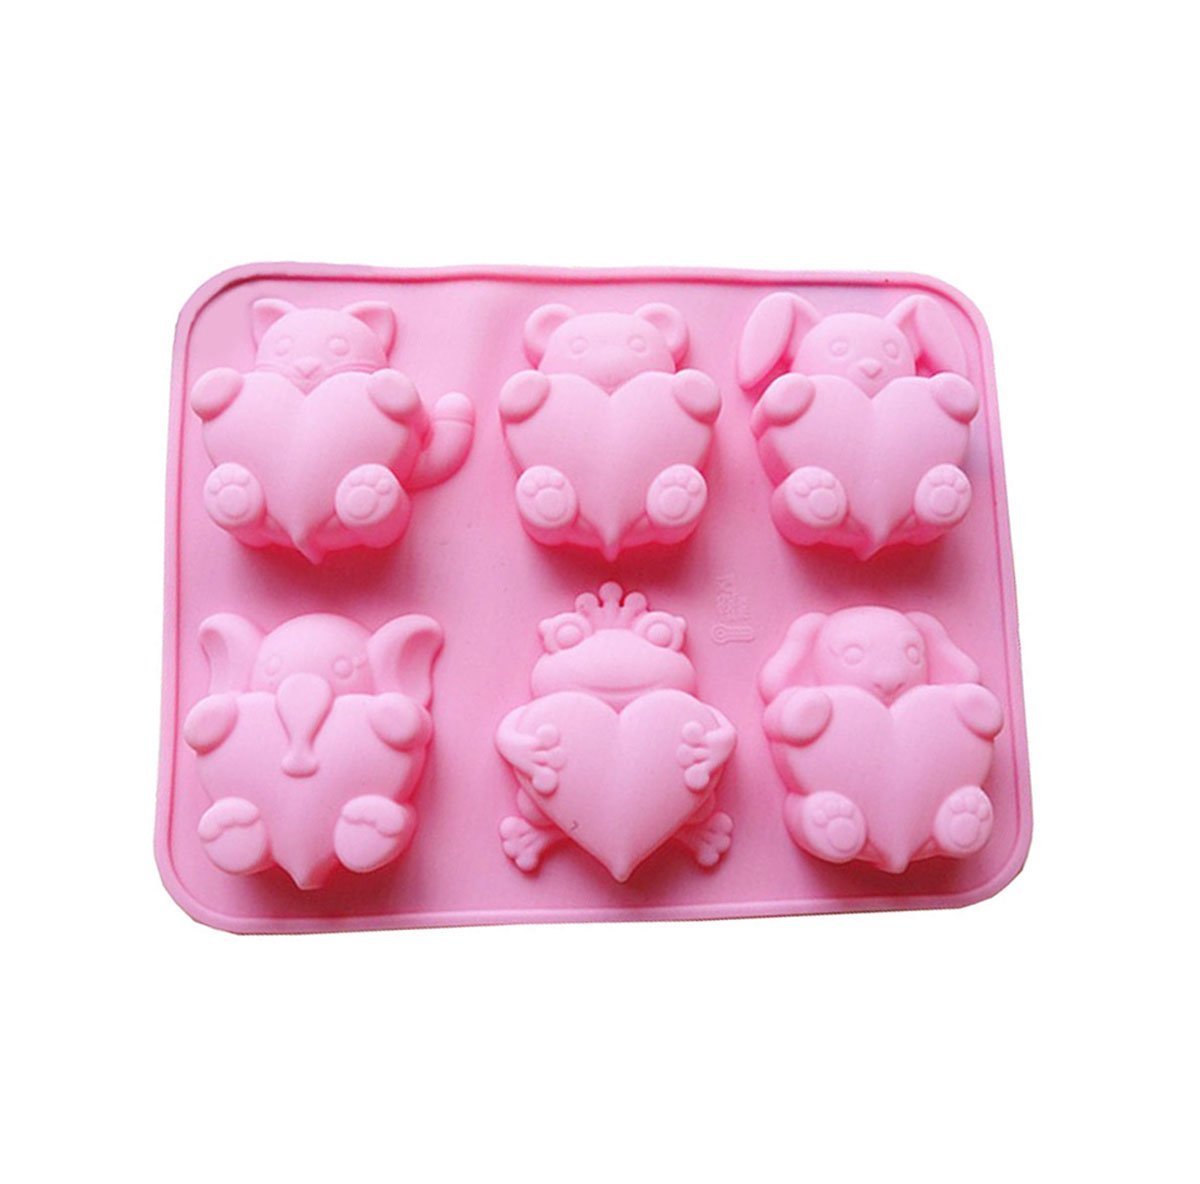 Cherion 6 Cavities Different Cute Animal-shaped Love Silicone Cake Baking Mold Handmade Soap Moulds Cake Pan Muffin Cups Biscuit Chocolate Ice Cube Tray DIY Mold, Pink